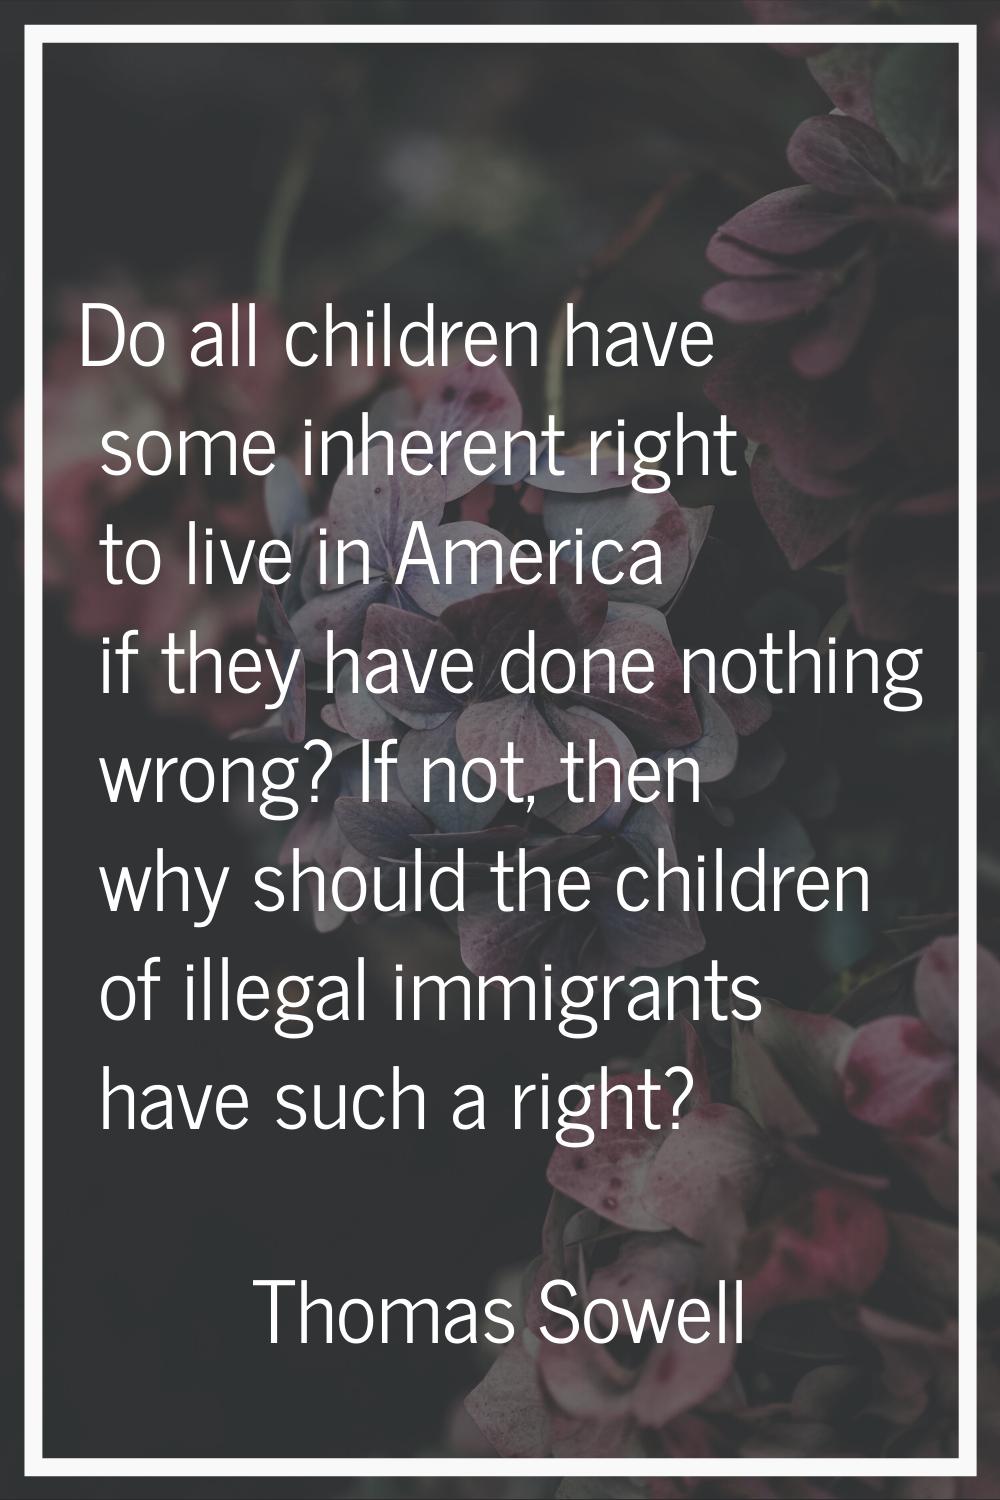 Do all children have some inherent right to live in America if they have done nothing wrong? If not